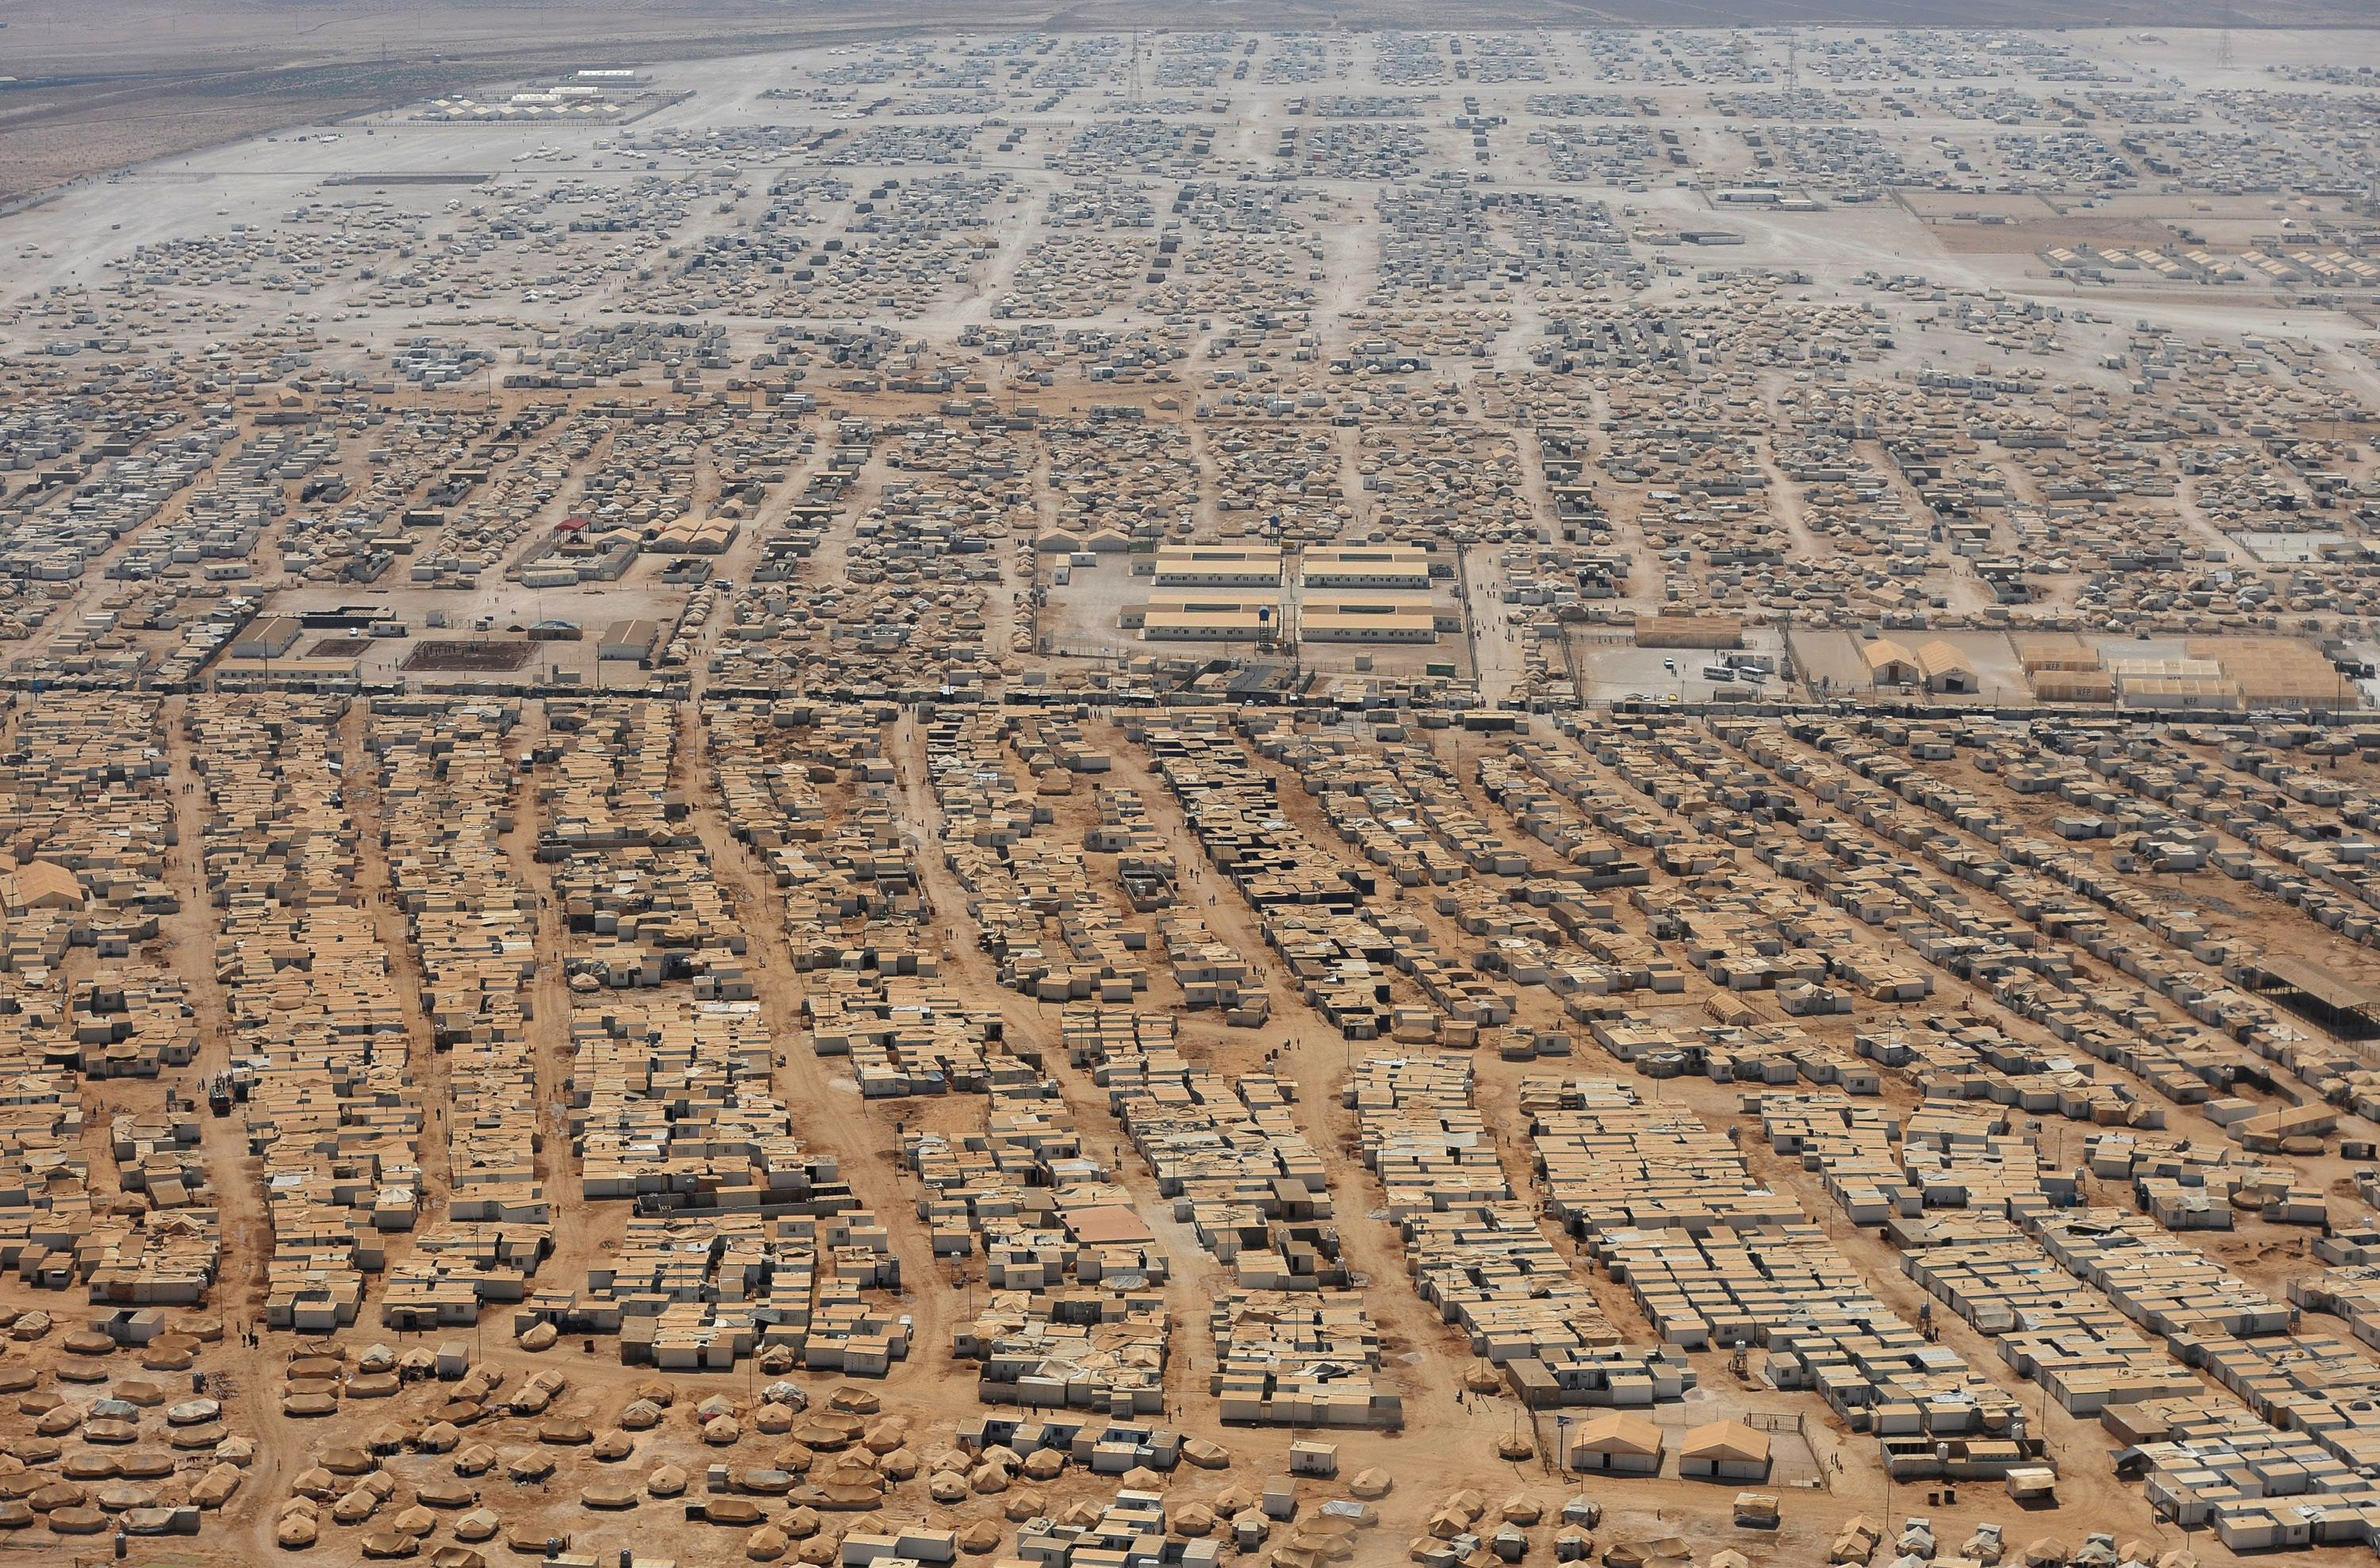 An aerial view shows the Zaatari refugee camp, near the Jordanian city of Mafraq July 18, 2013. U.S. Secretary of State John Kerry spent about 40 minutes with half a dozen refugees who vented their frustration at the international community's failure to end Syria's more than two-year-old civil war, while visiting the camp that holds roughly 115,000 Syrian refugees in Jordan about 12 km (eight miles) from the Syrian border. REUTERS/Mandel Ngan/Pool (JORDAN - Tags: POLITICS SOCIETY IMMIGRATION TPX IMAGES OF THE DAY) - RTX11QHF